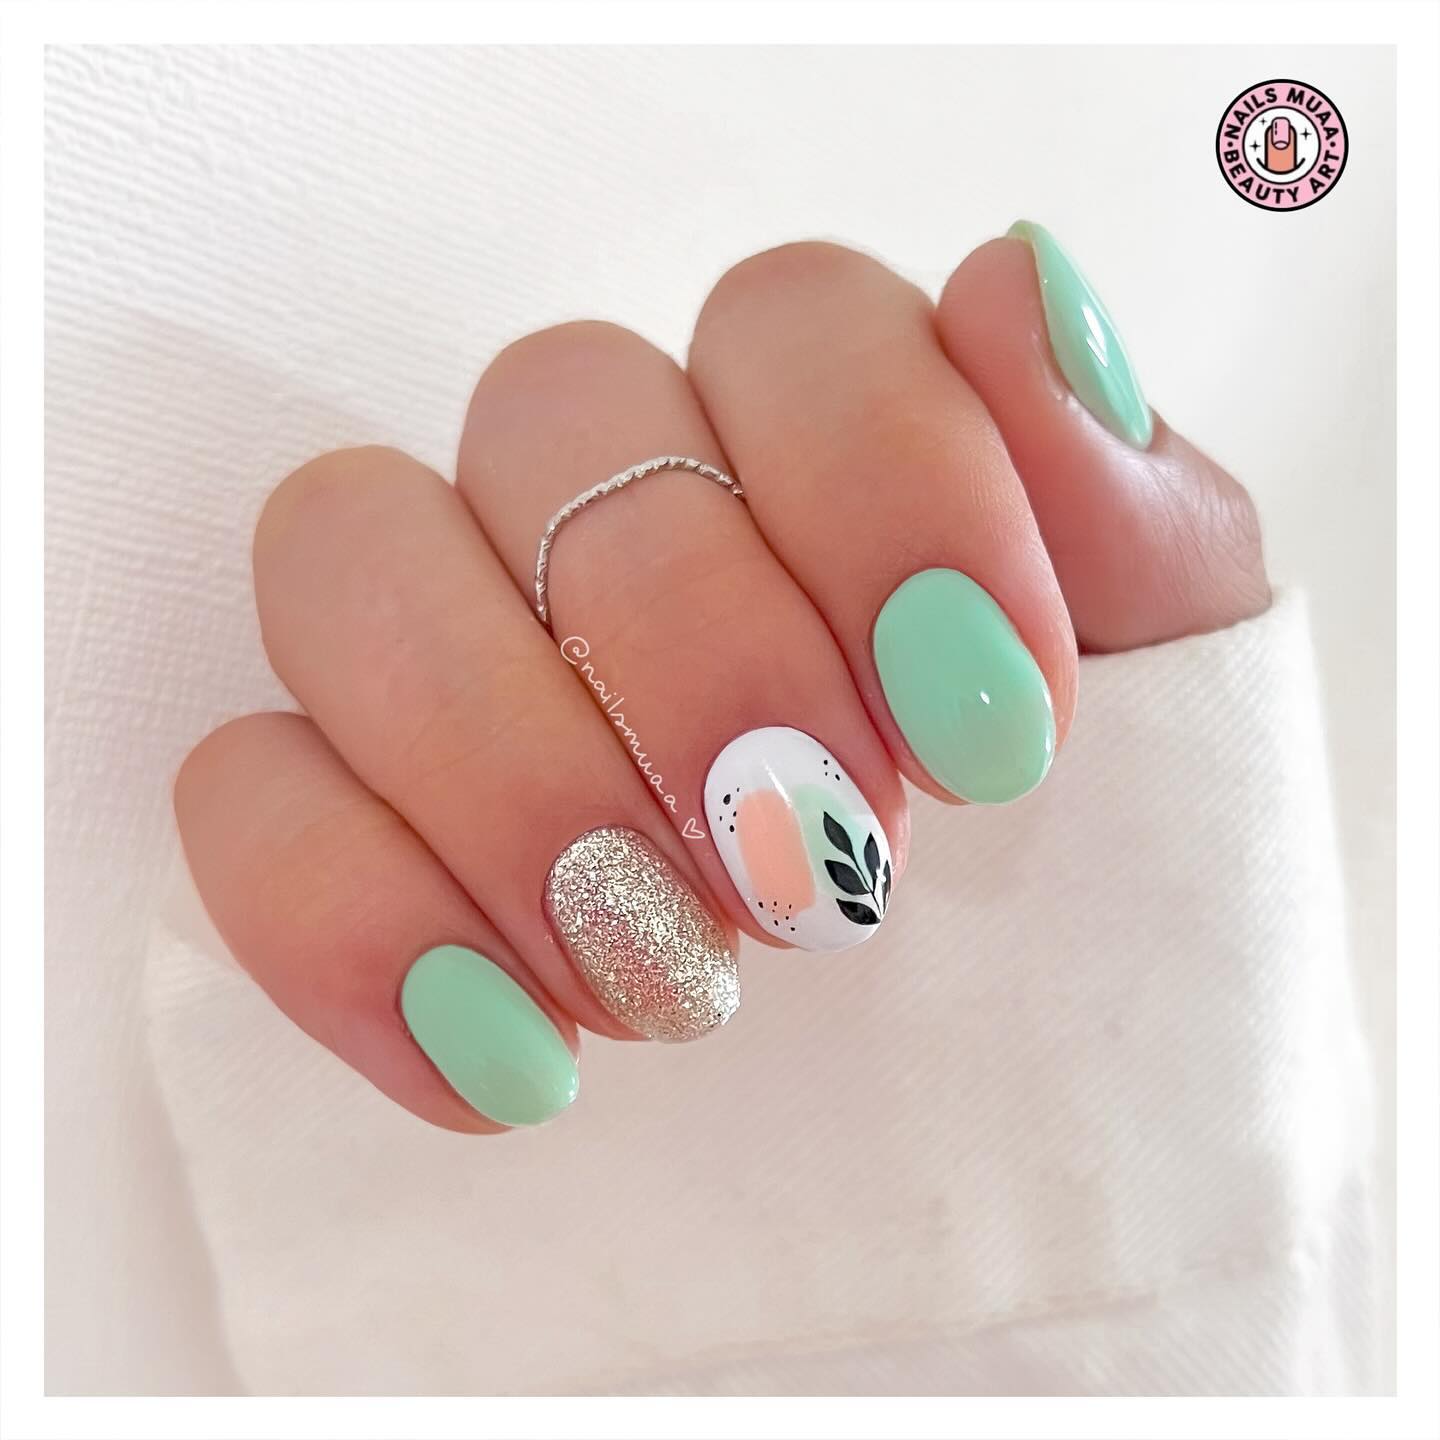 100 Of The Best Spring Inspired Nail Designs images 62